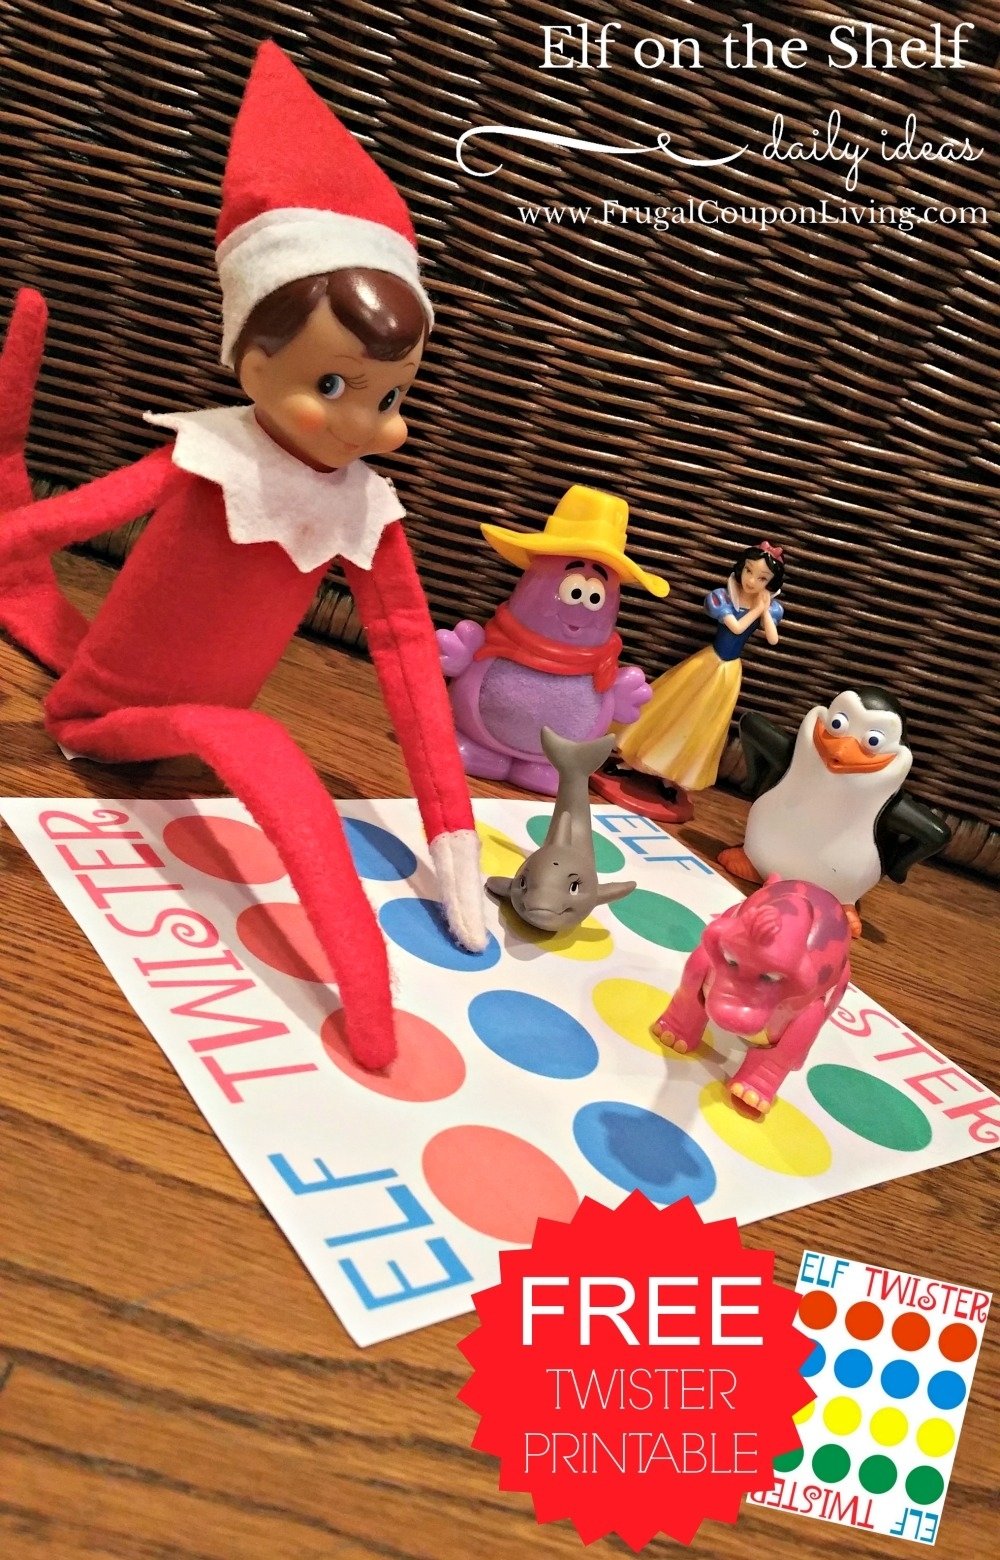 10 Fashionable What Is Elf On The Shelf Ideas elf on the shelf ideas elf twister printable 9 2022